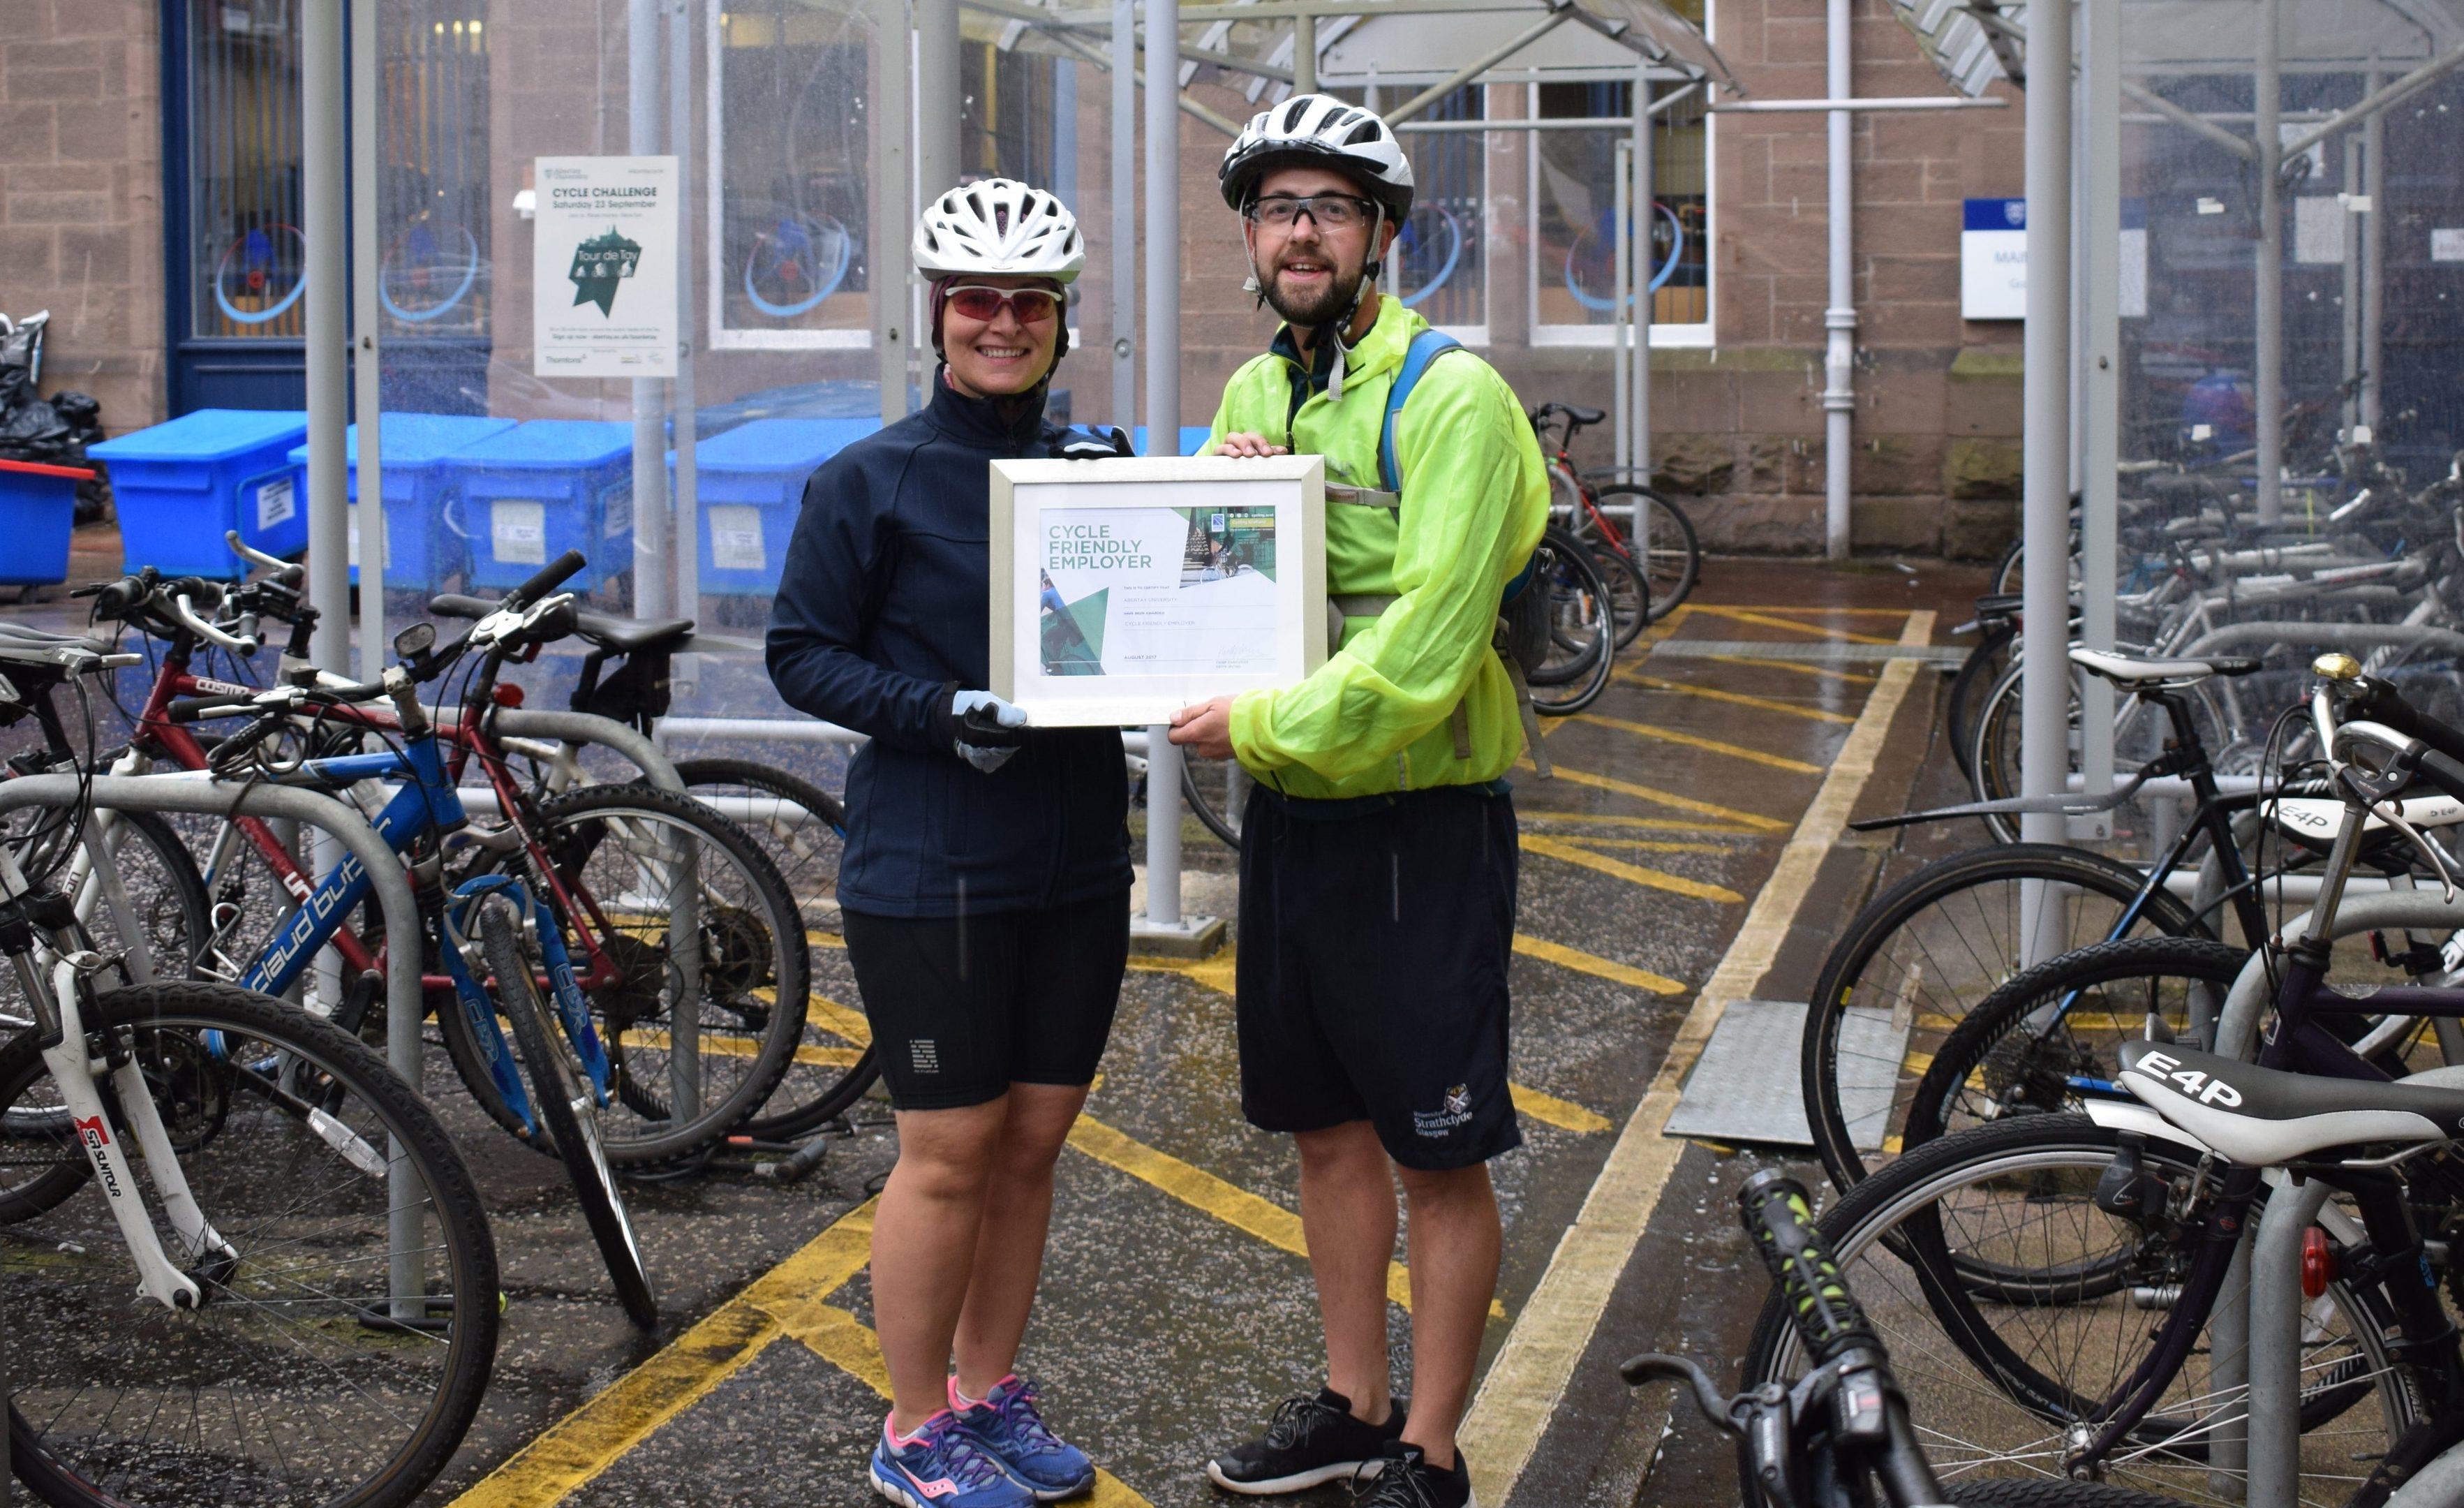 Business continuity and safety co-ordinator Shonagh McAlpine, and Dundee Academy of Sport teaching fellow Iain Stewart with the Cycling Scotland certificate.